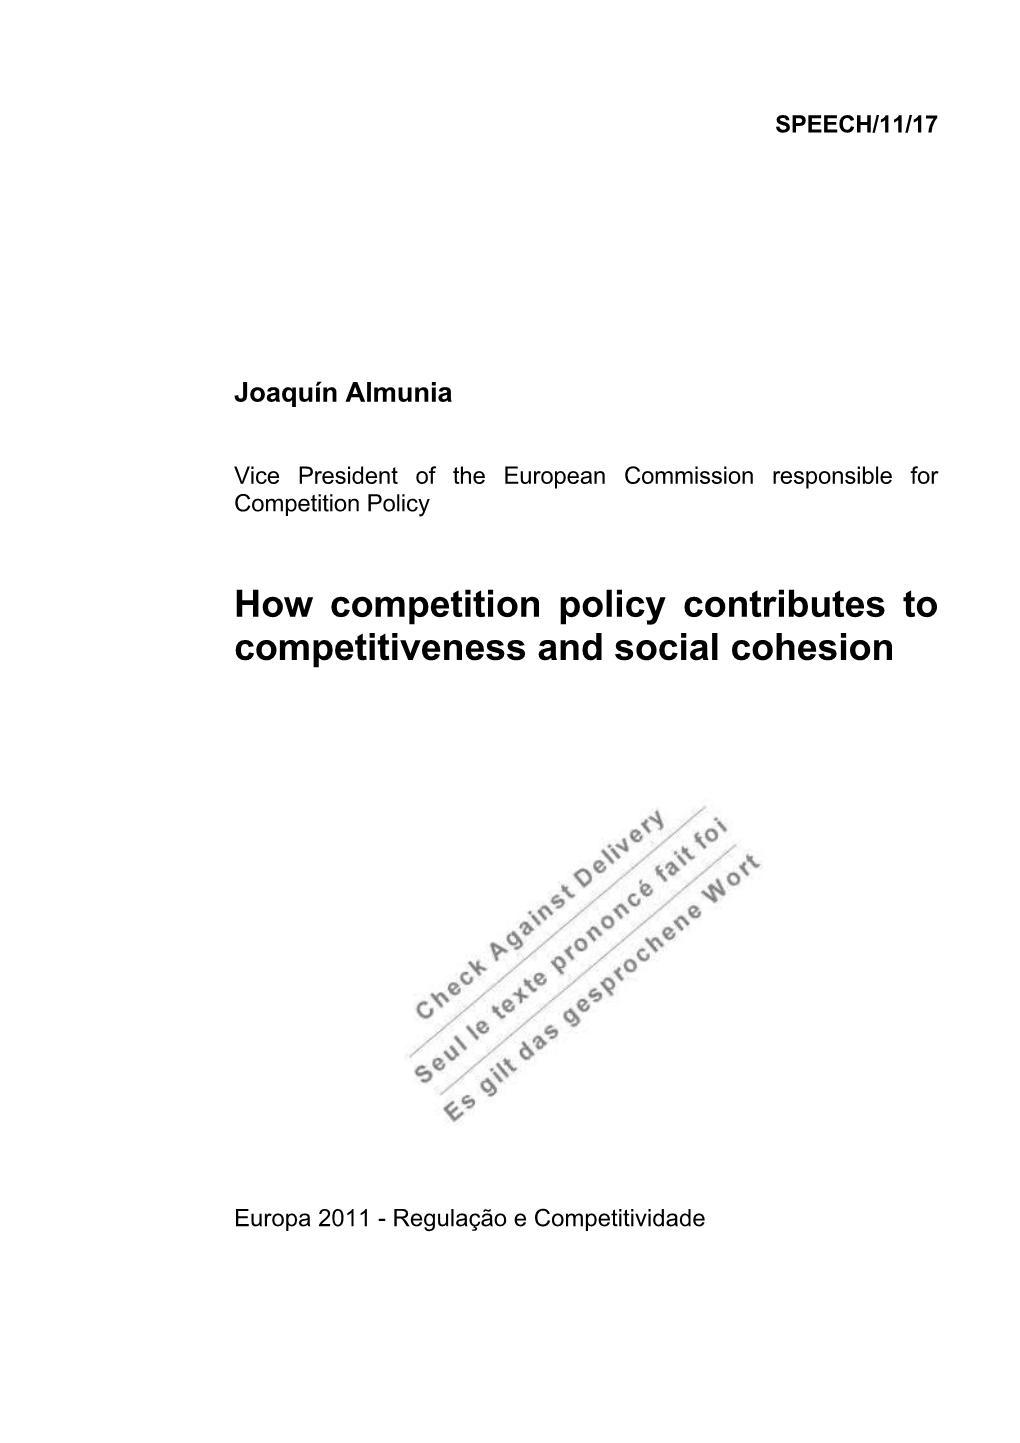 How Competition Policy Contributes to Competitiveness and Social Cohesion